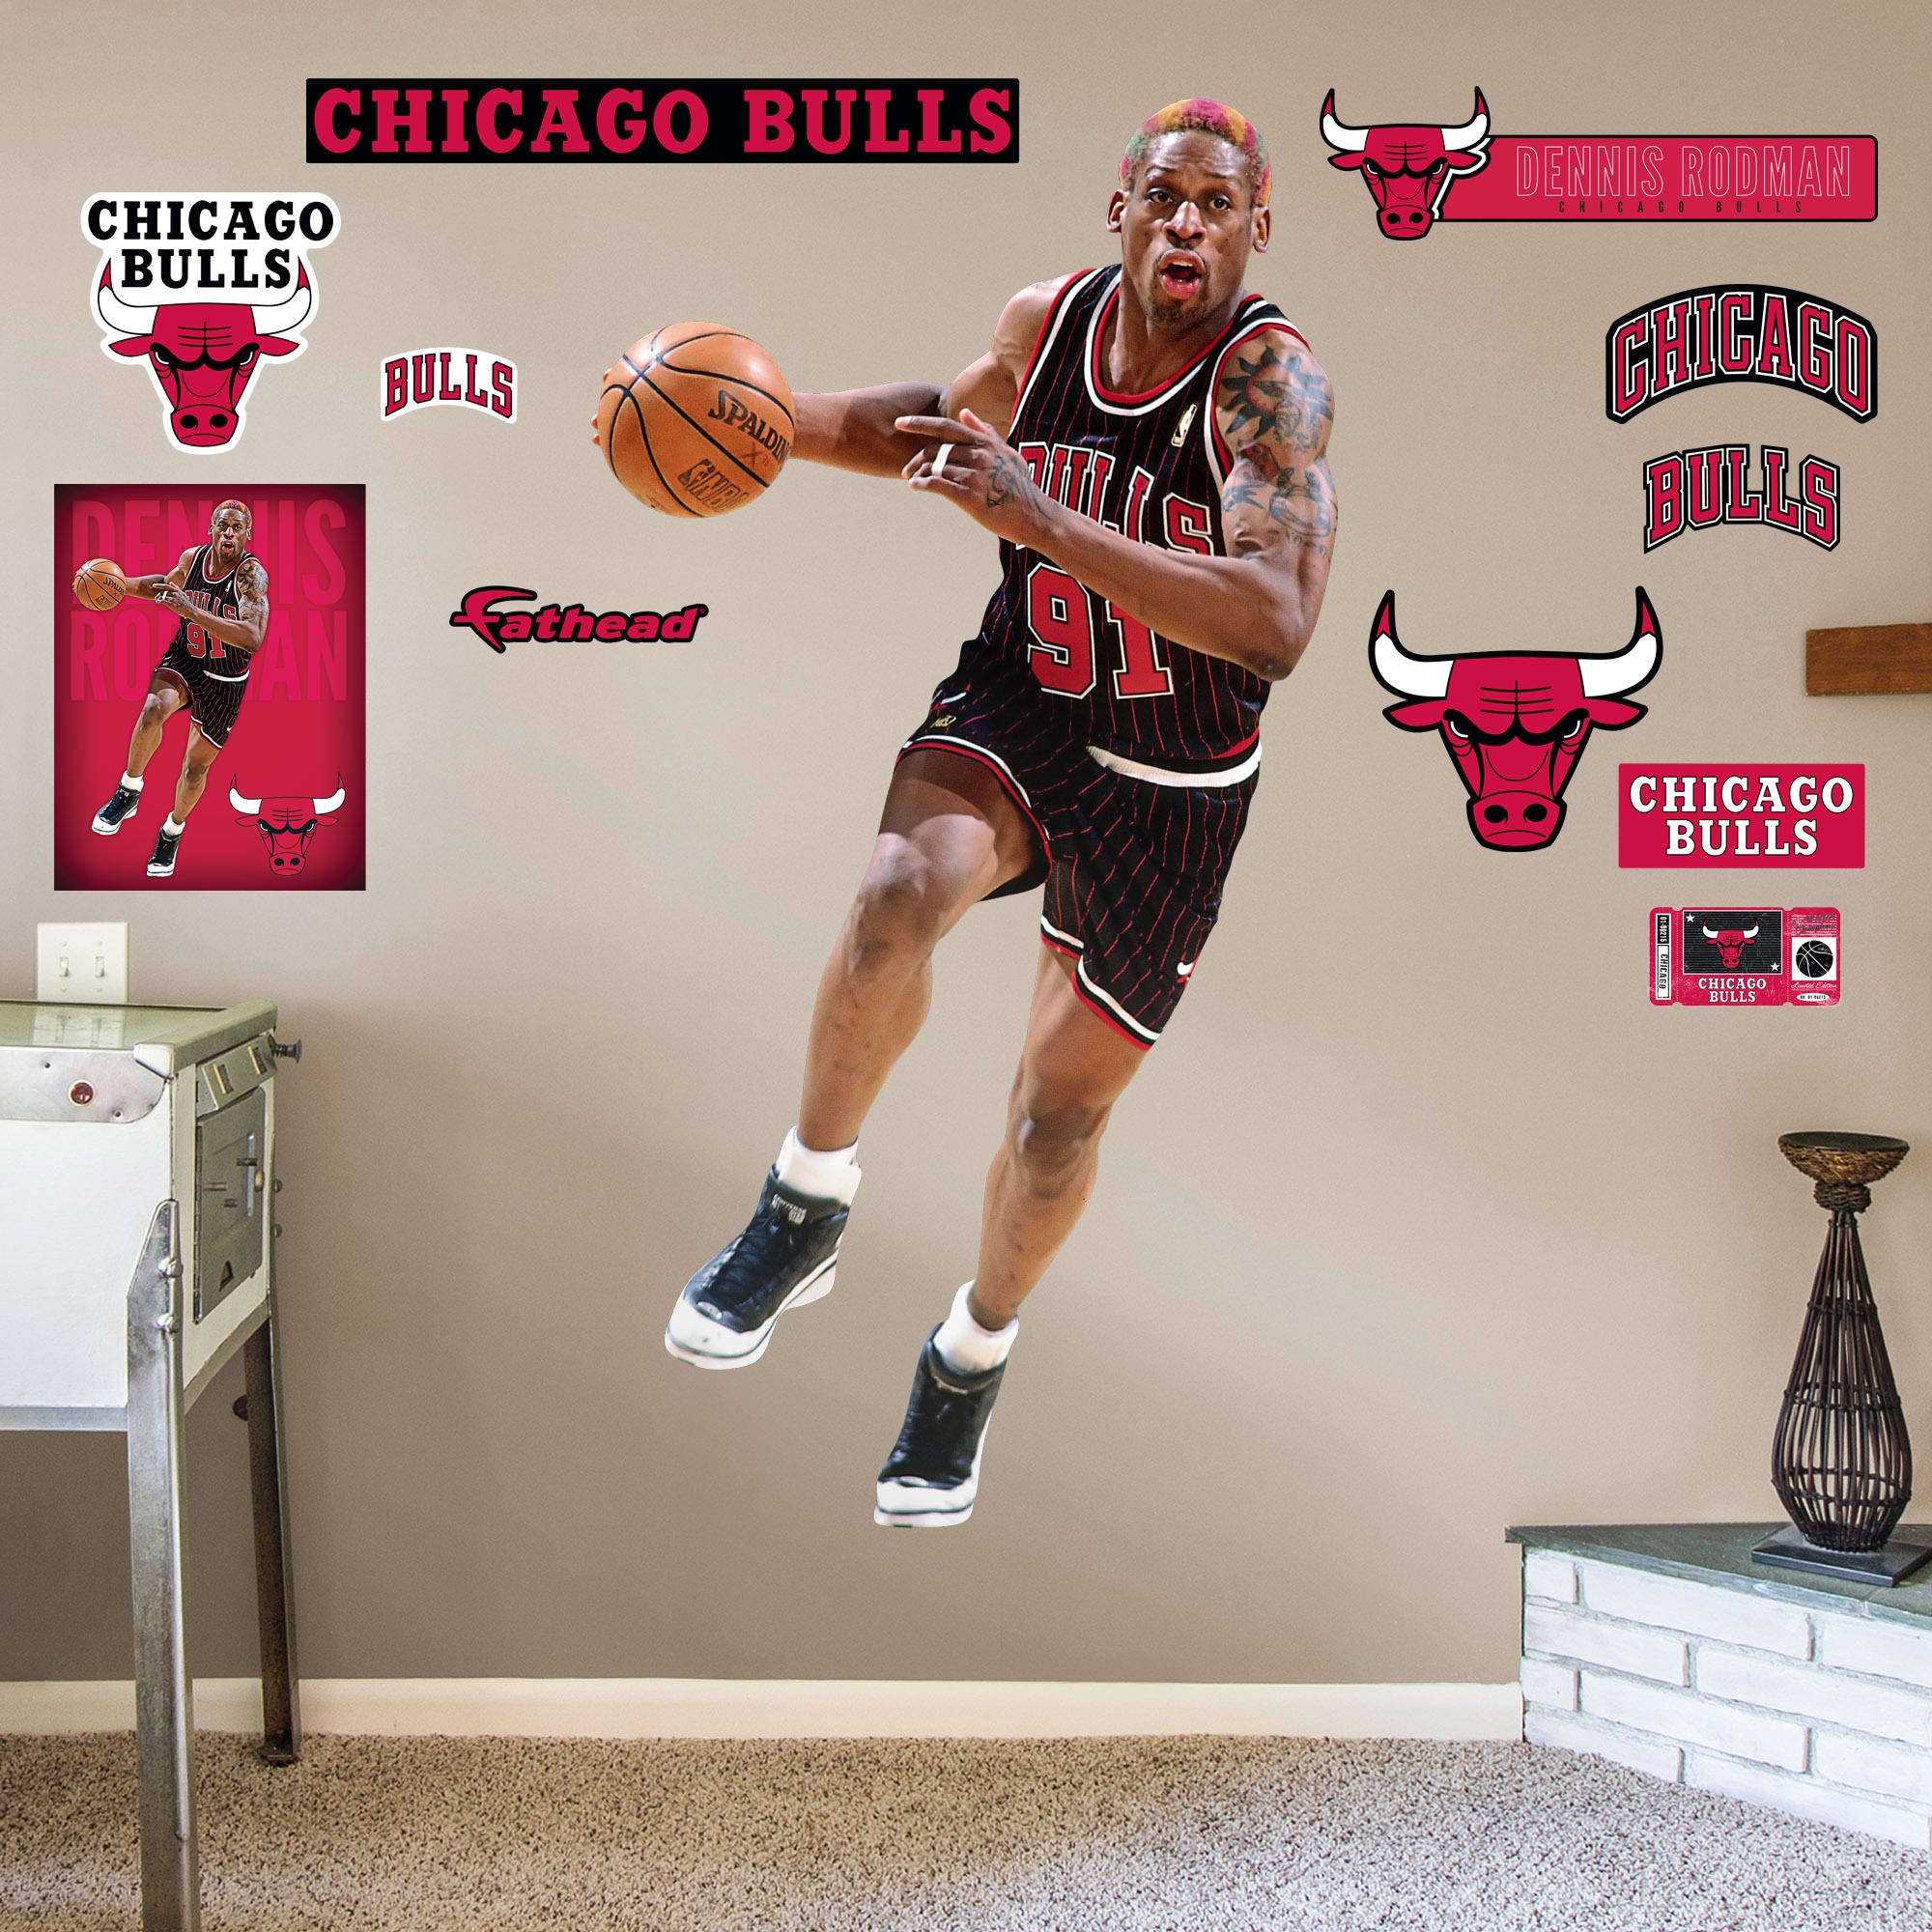 Dennis Rodman for Chicago Bulls - Officially Licensed NBA Removable Wall Decal Life-Size Athlete + 10 Decals (41"W x 78"H) by Fa